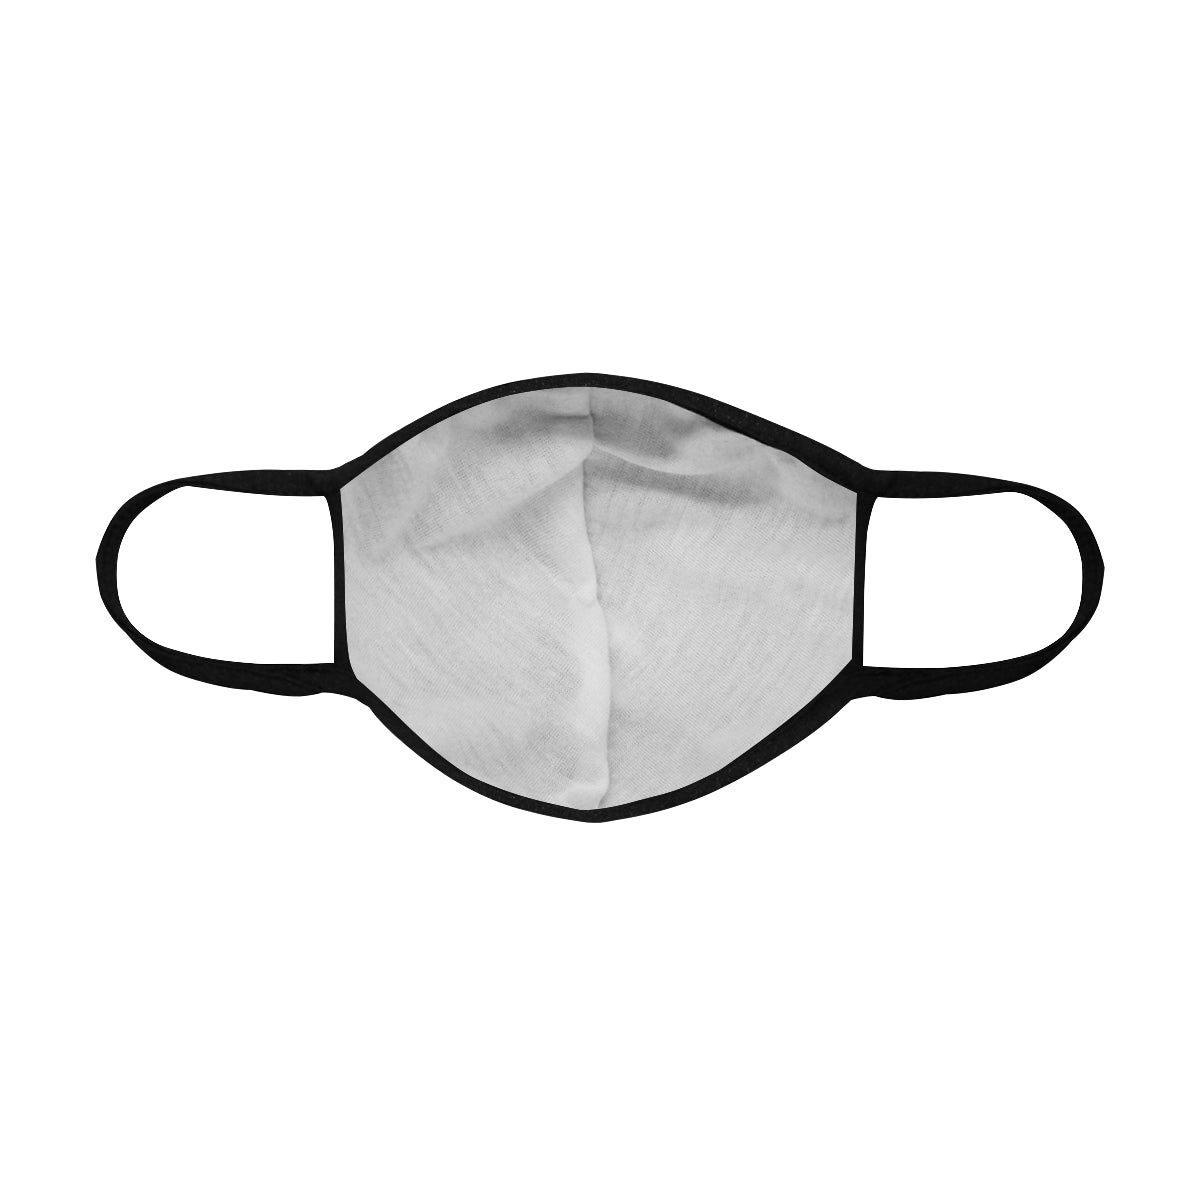 Tribal Print Cotton Fabric Face Mask with filter slot (30 Filters Included) - Non-medical use